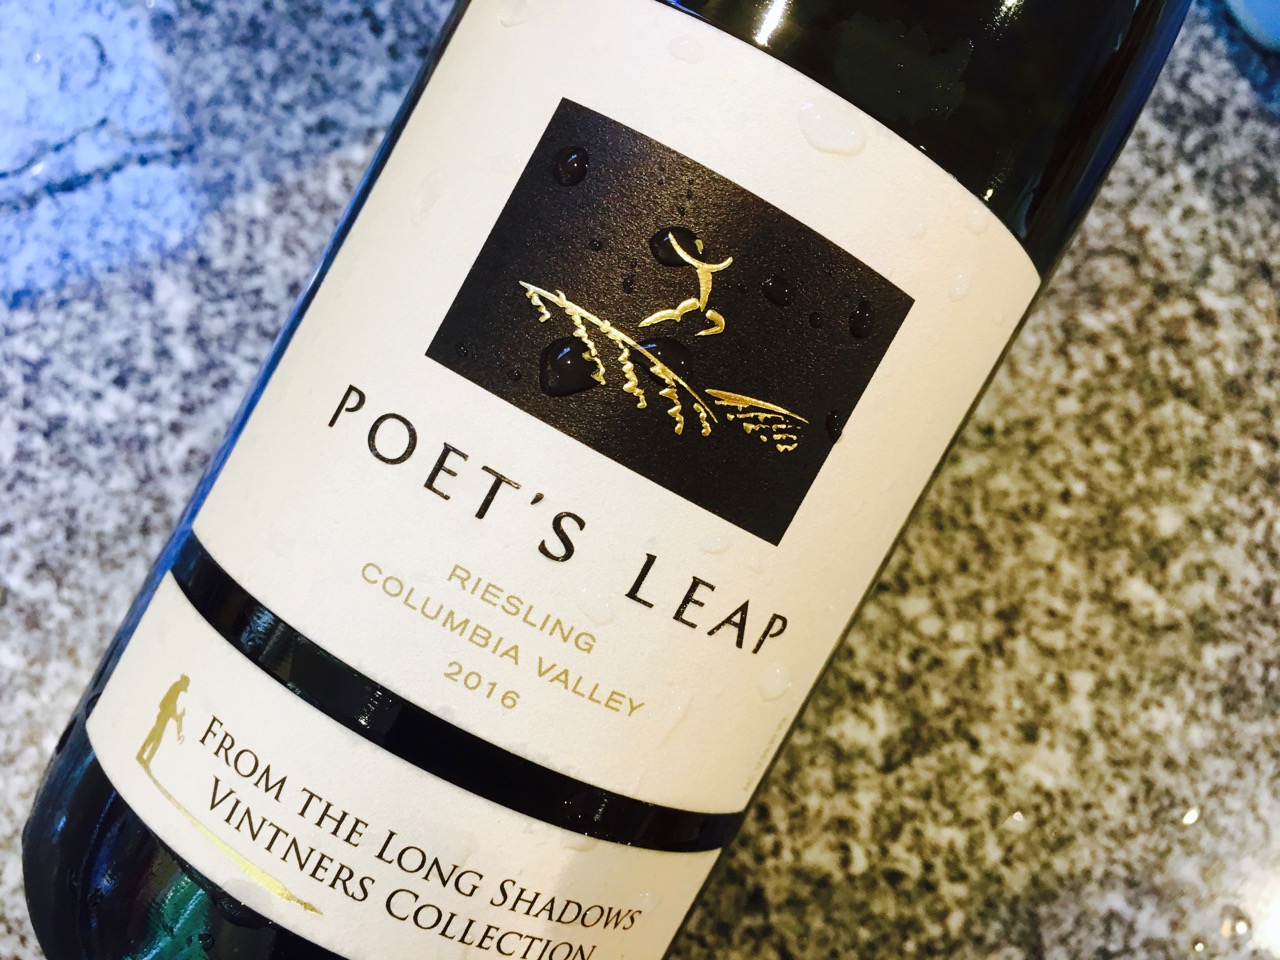 2016 Long Shadows Riesling Poet’s Leap Columbia Valley